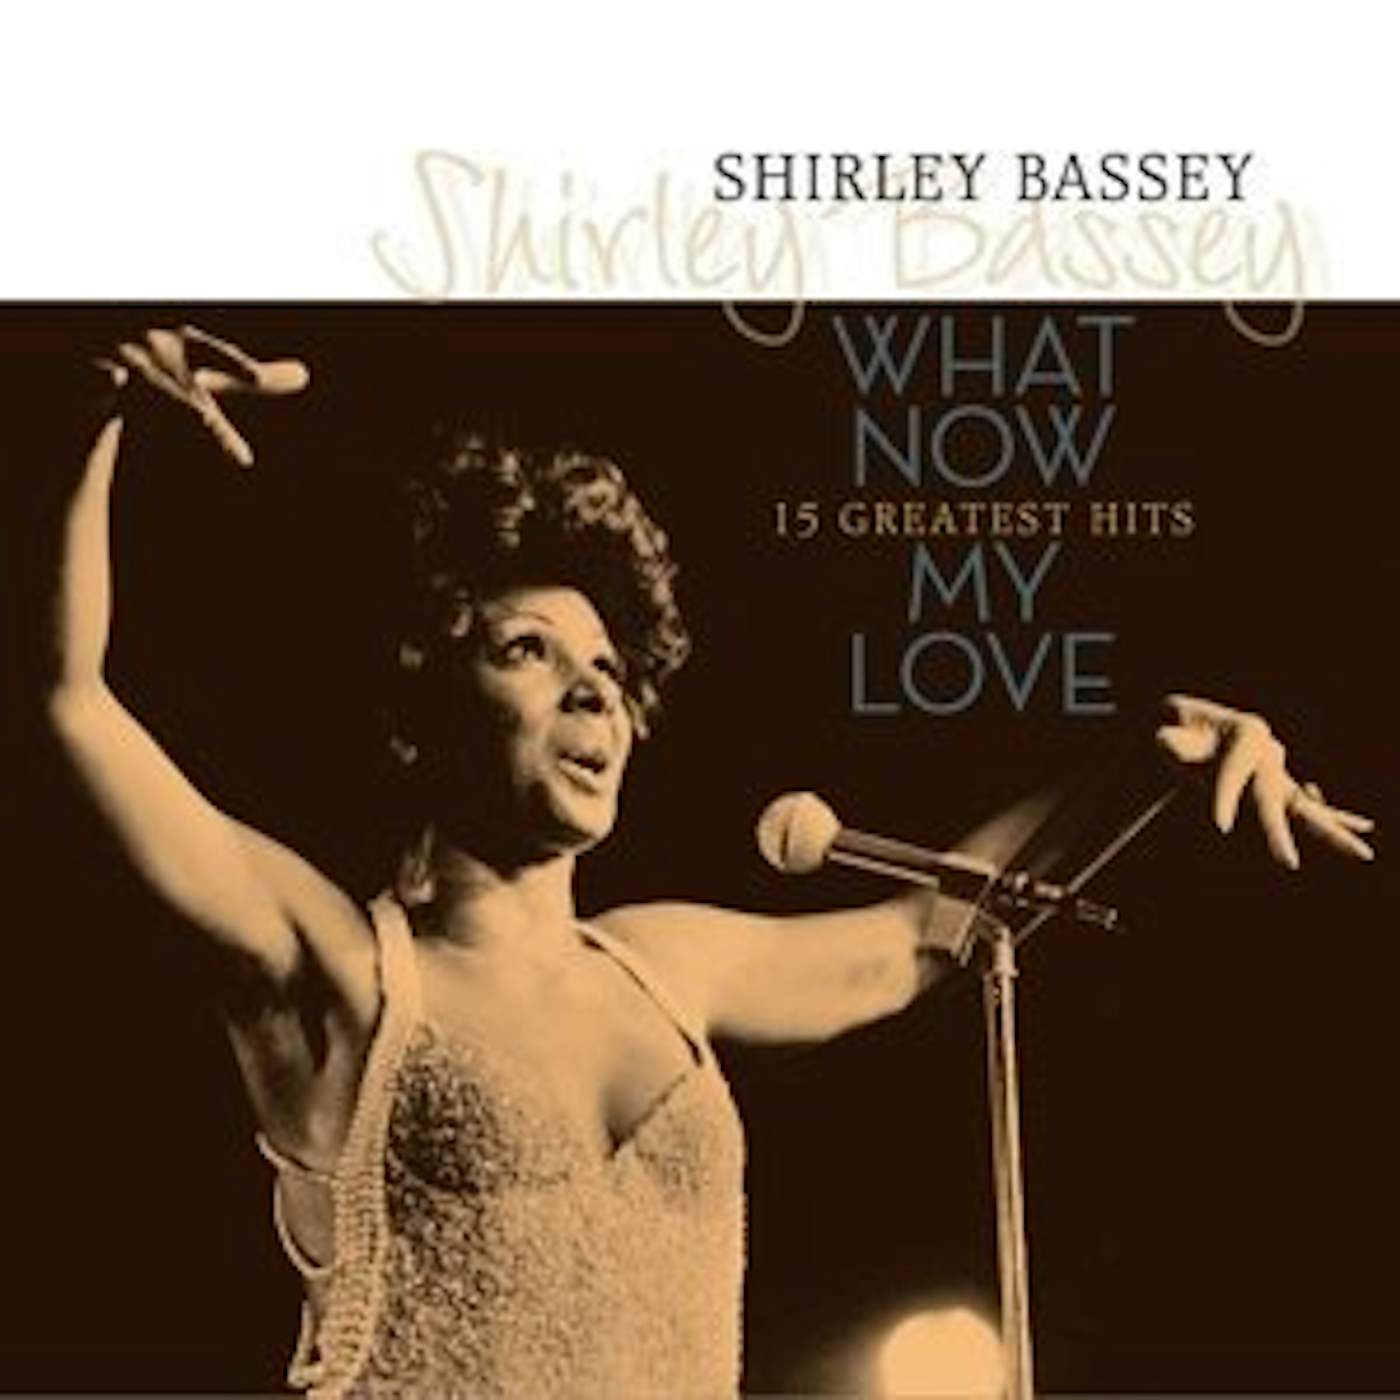 Shirley Bassey WHAT NOW MY LOVE: 15 GREATEST HITS Vinyl Record